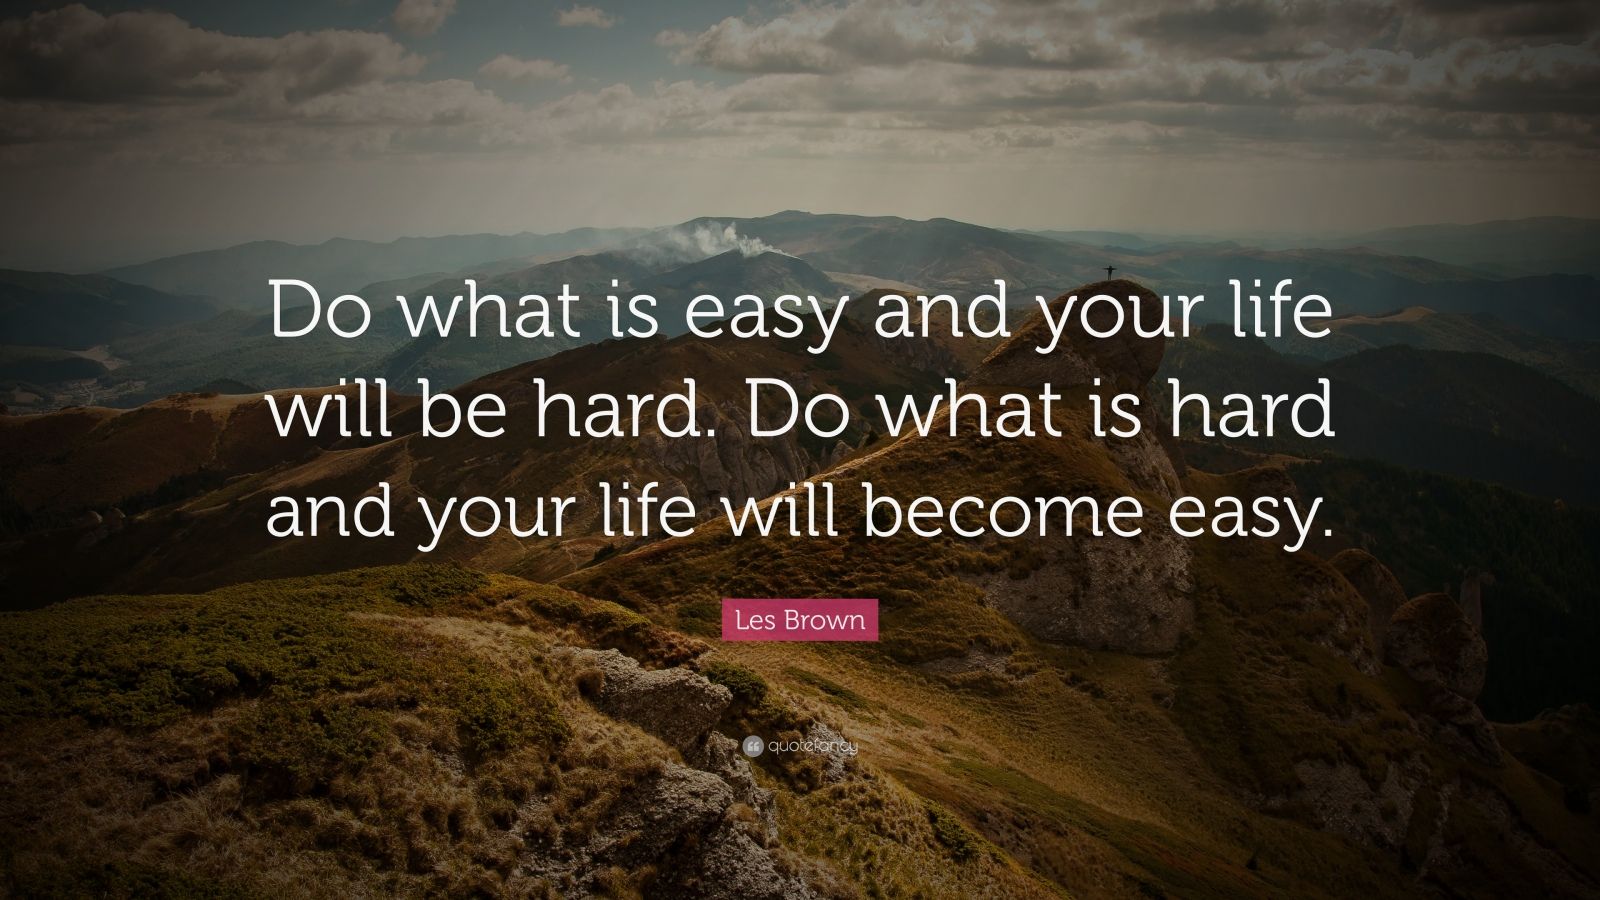 Les Brown Quote: “Do what is easy and your life will be hard. Do what ...